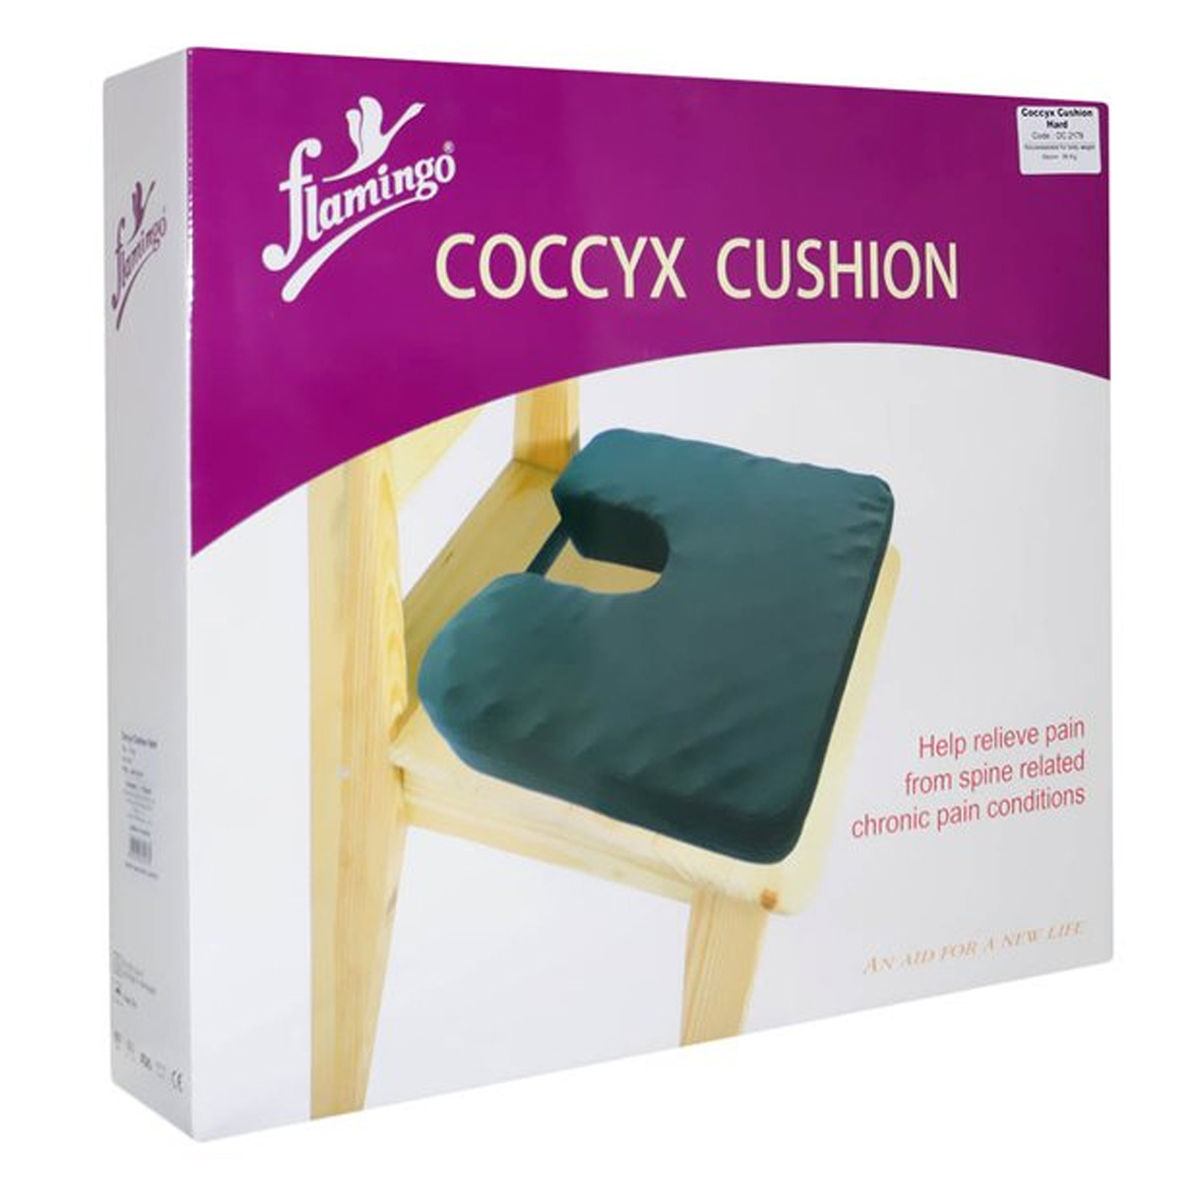 Buy Flamingo Coccyx Cushion, 1 Count Online